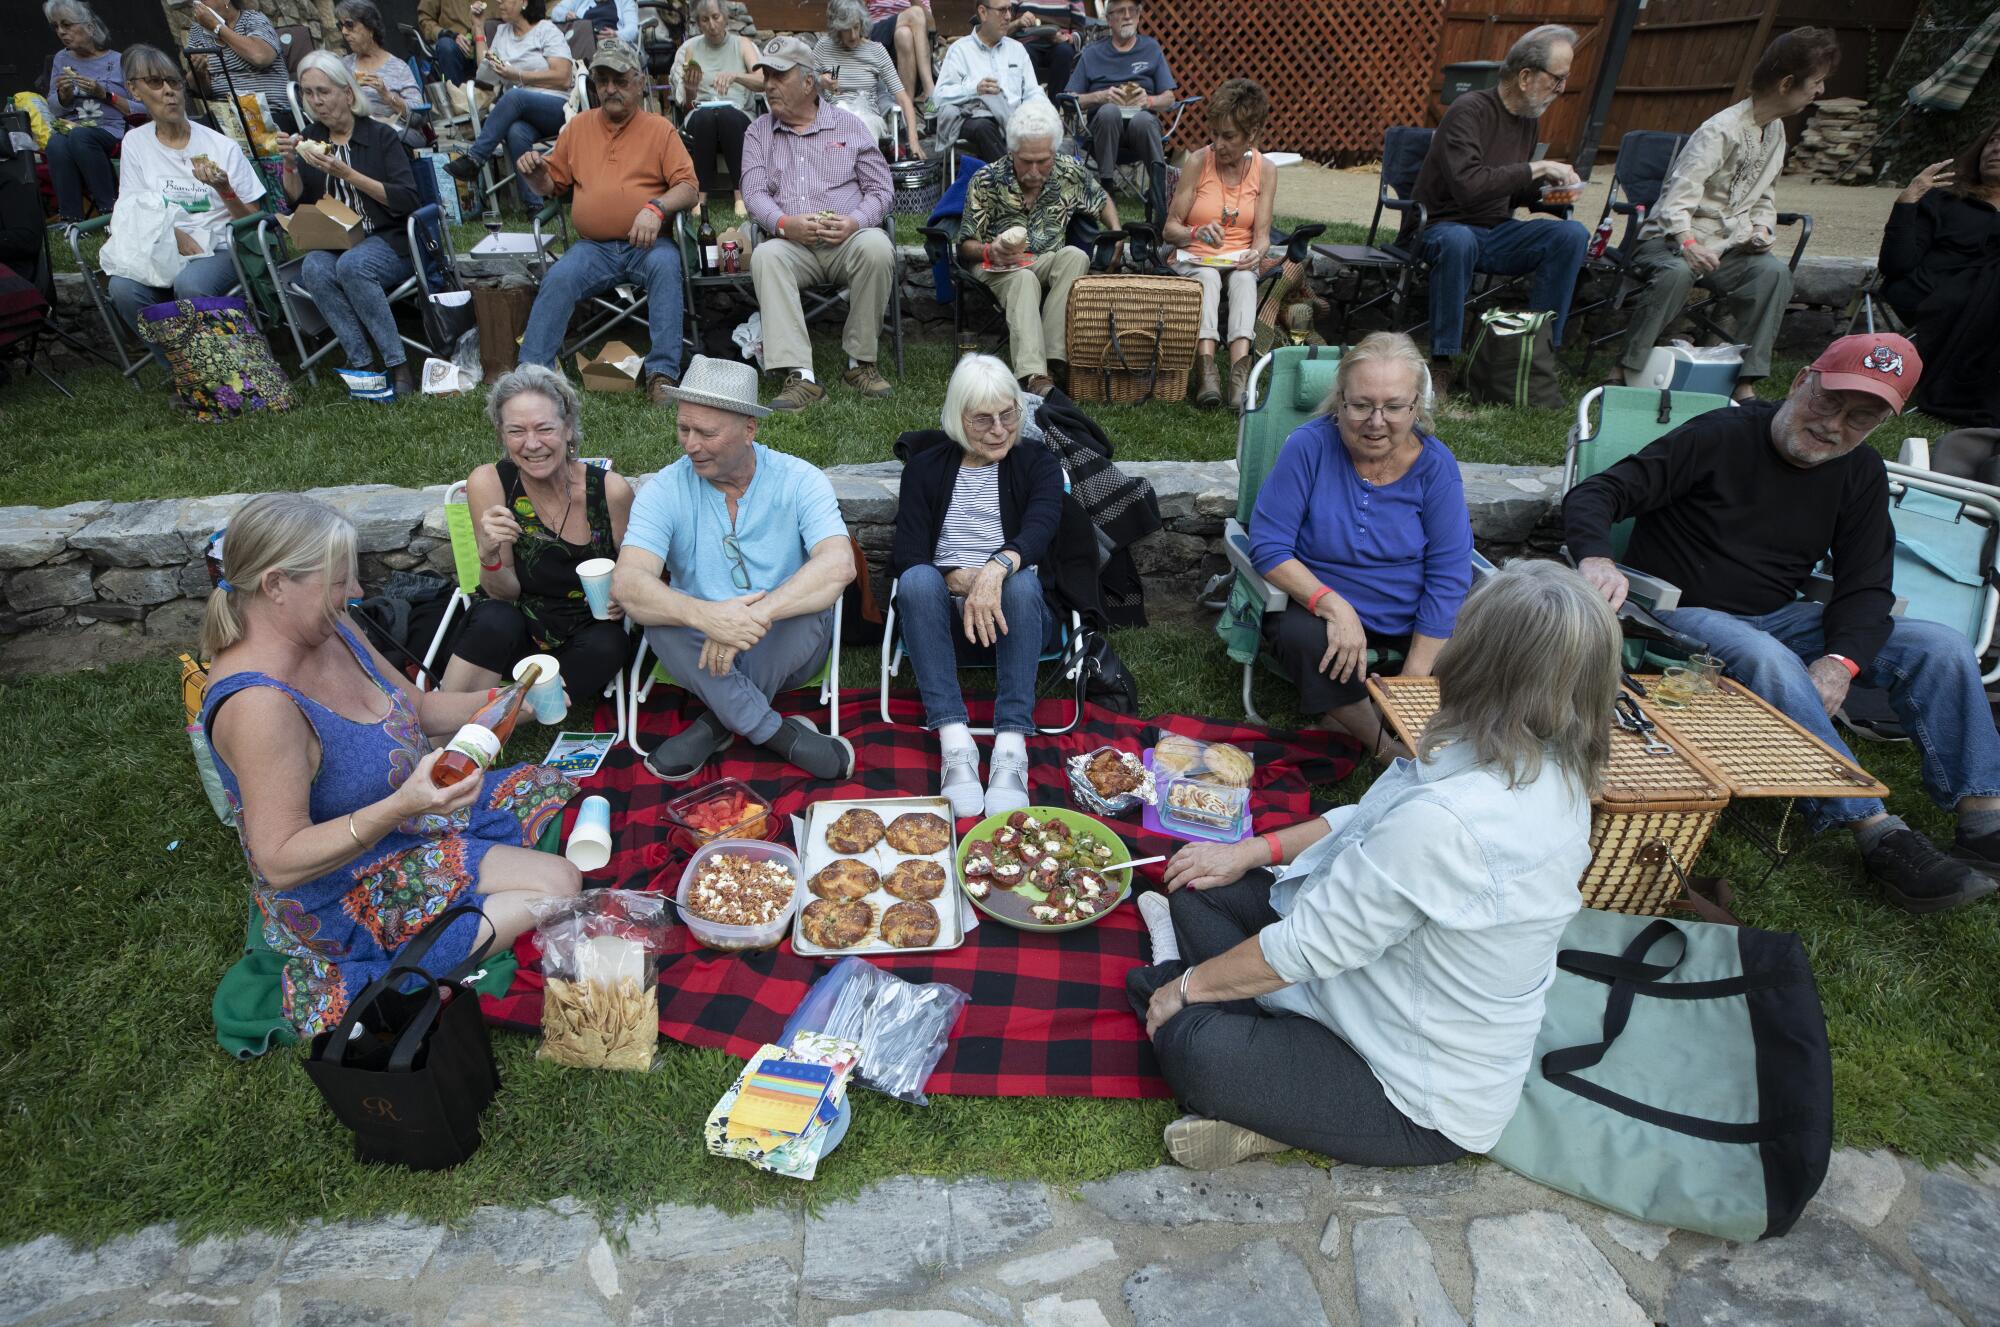 Playgoers sit around a picnic spread